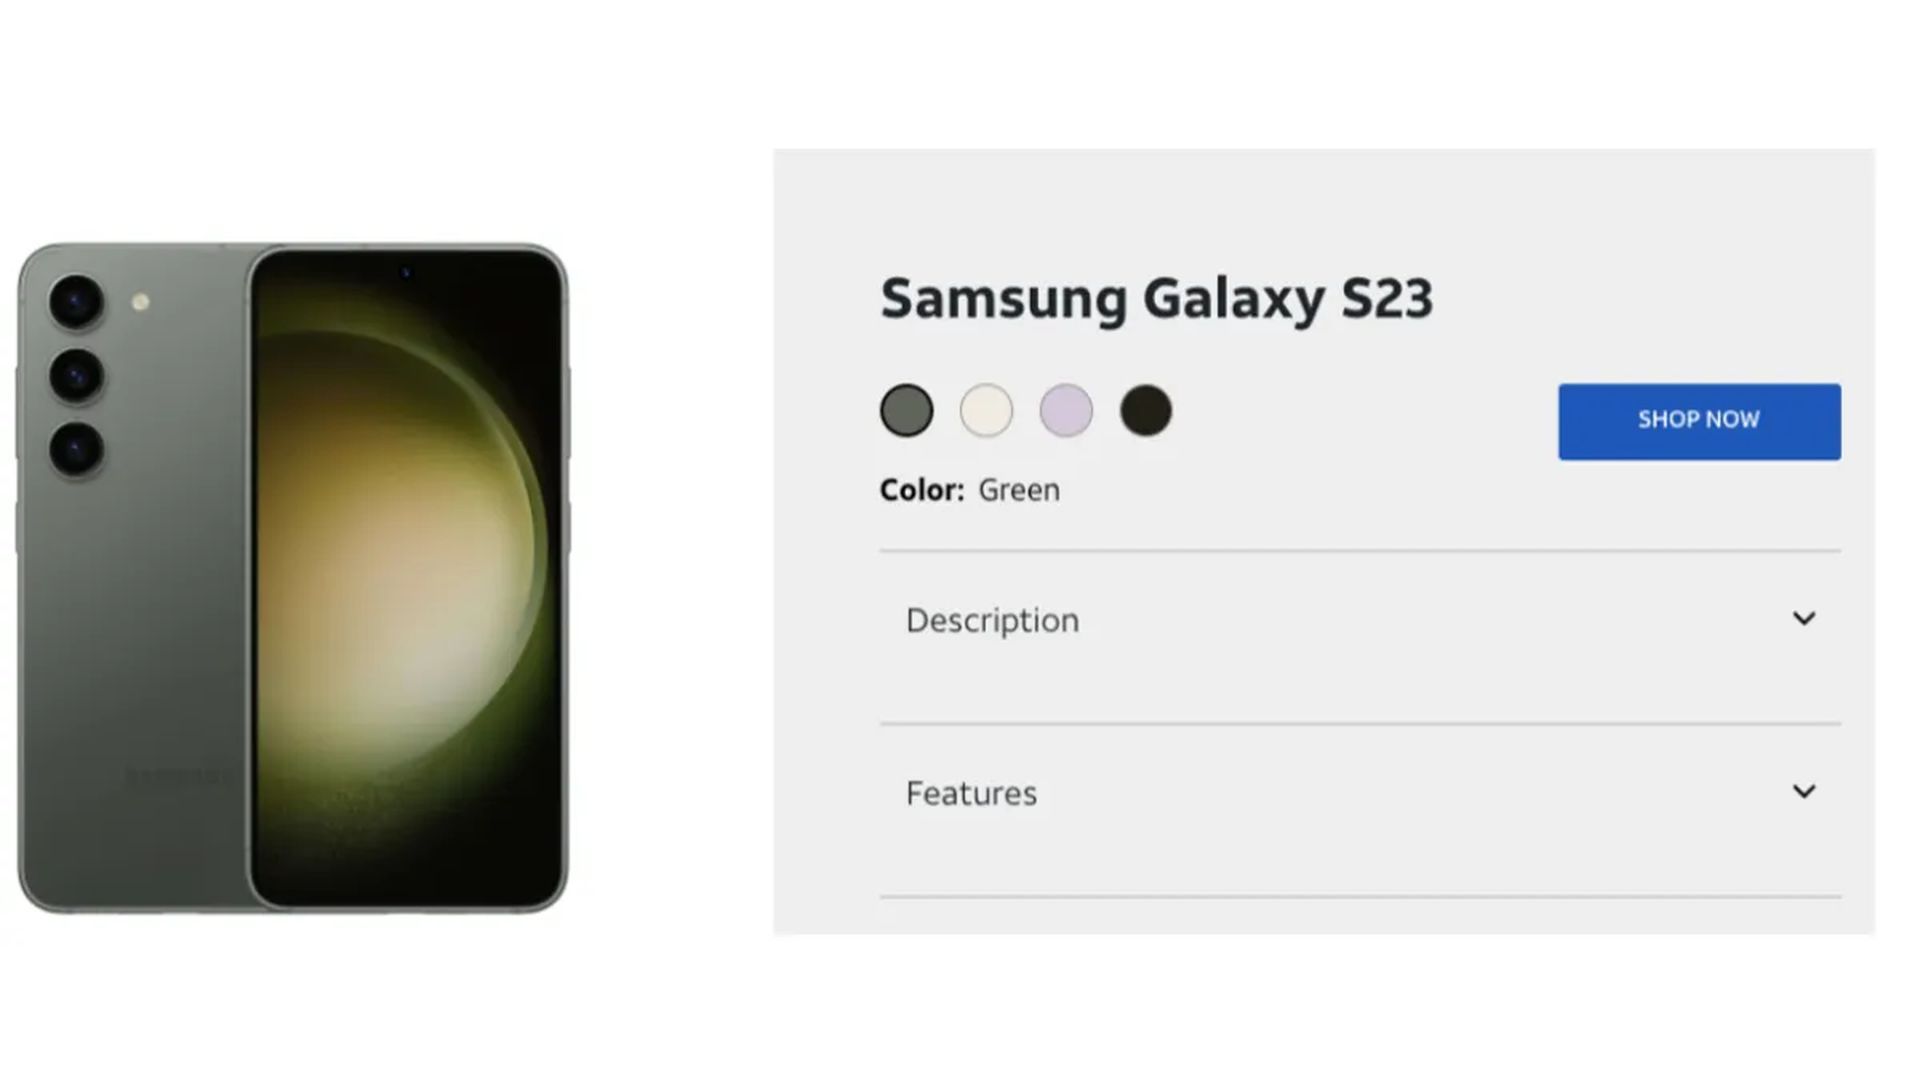 AT&T Samsung Galaxy S23 Ultra leak: Specs, price, and more